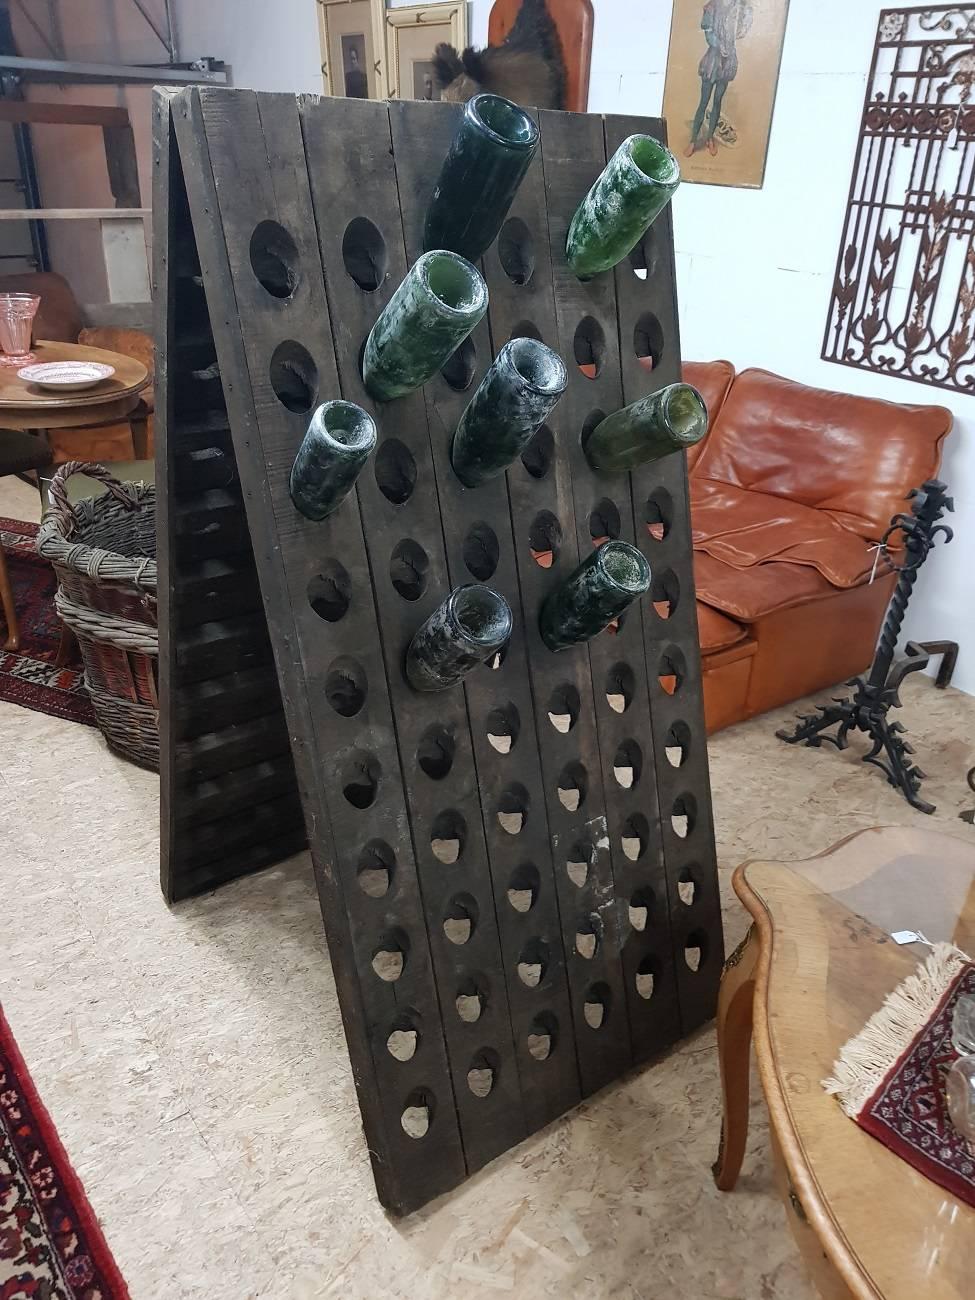 French champagne racks for 120 bottles from circa 1970-1980 from the Reims region, these can be found in most of the Chateau’s tunnels. They are in a good but used condition. Very nice as a room divider with some old bottles.
We have 3 in stock and